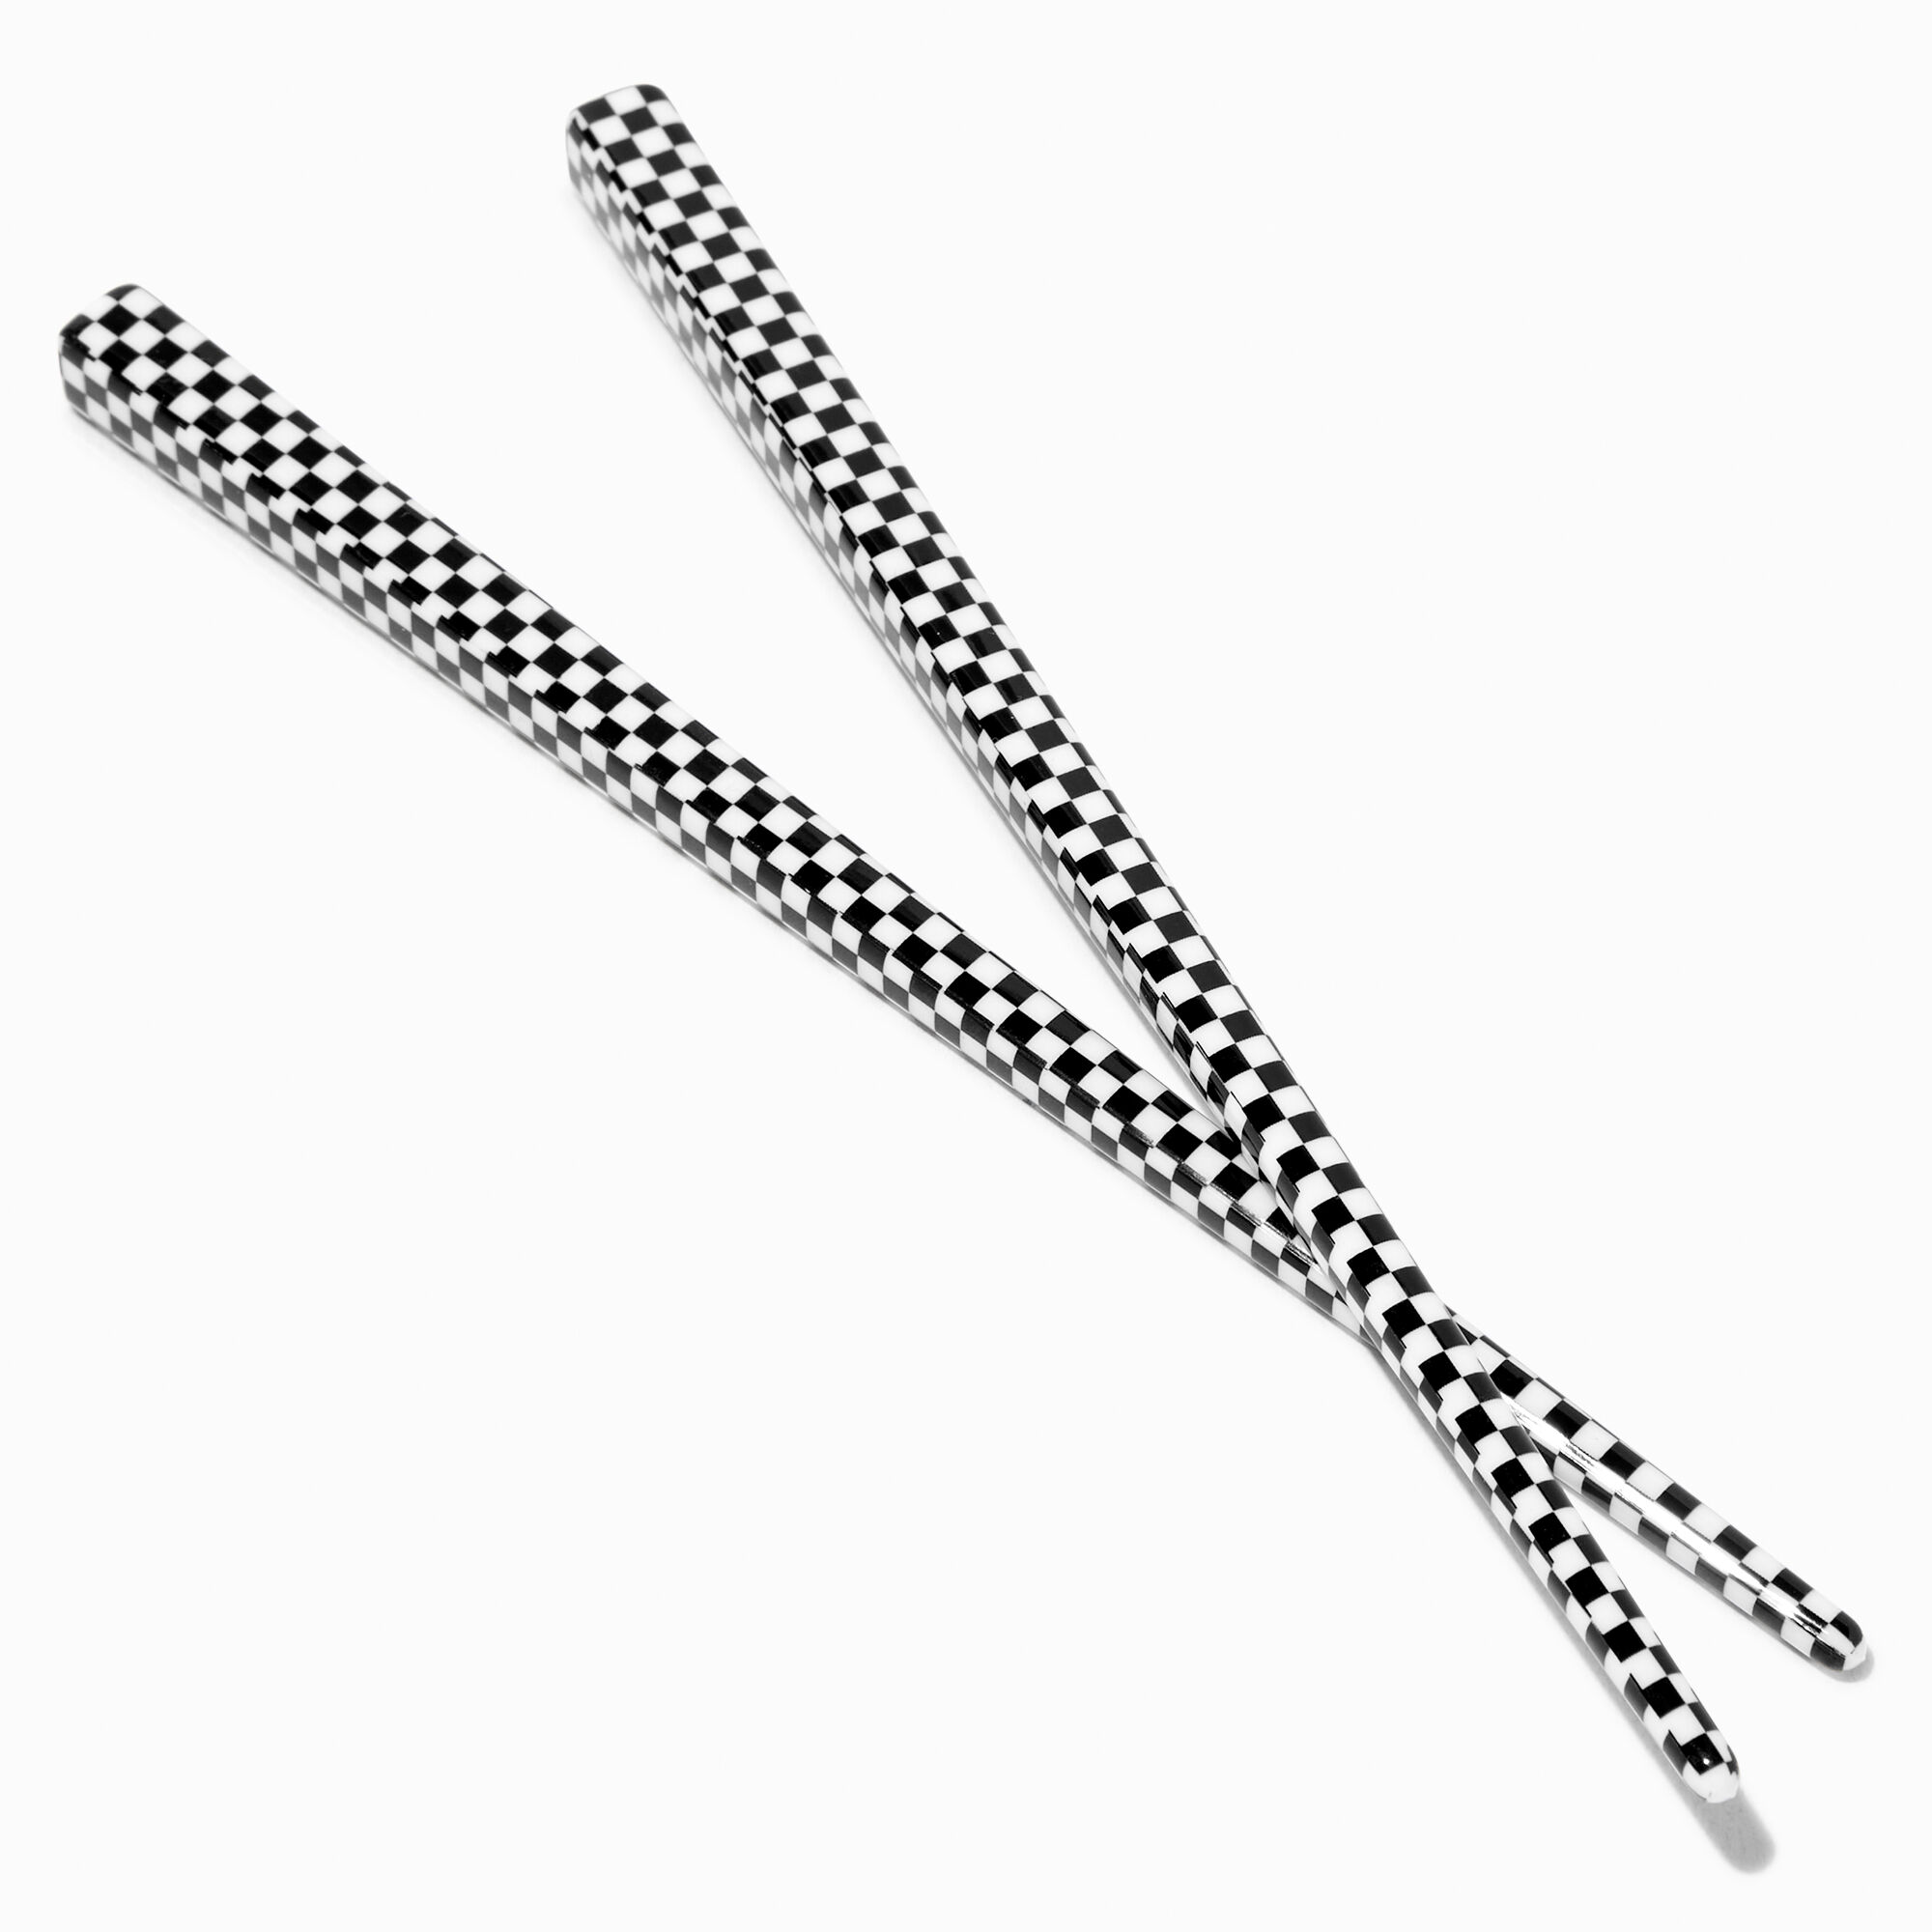 View Claires Black Checkered Hair Sticks 2 Pack White information